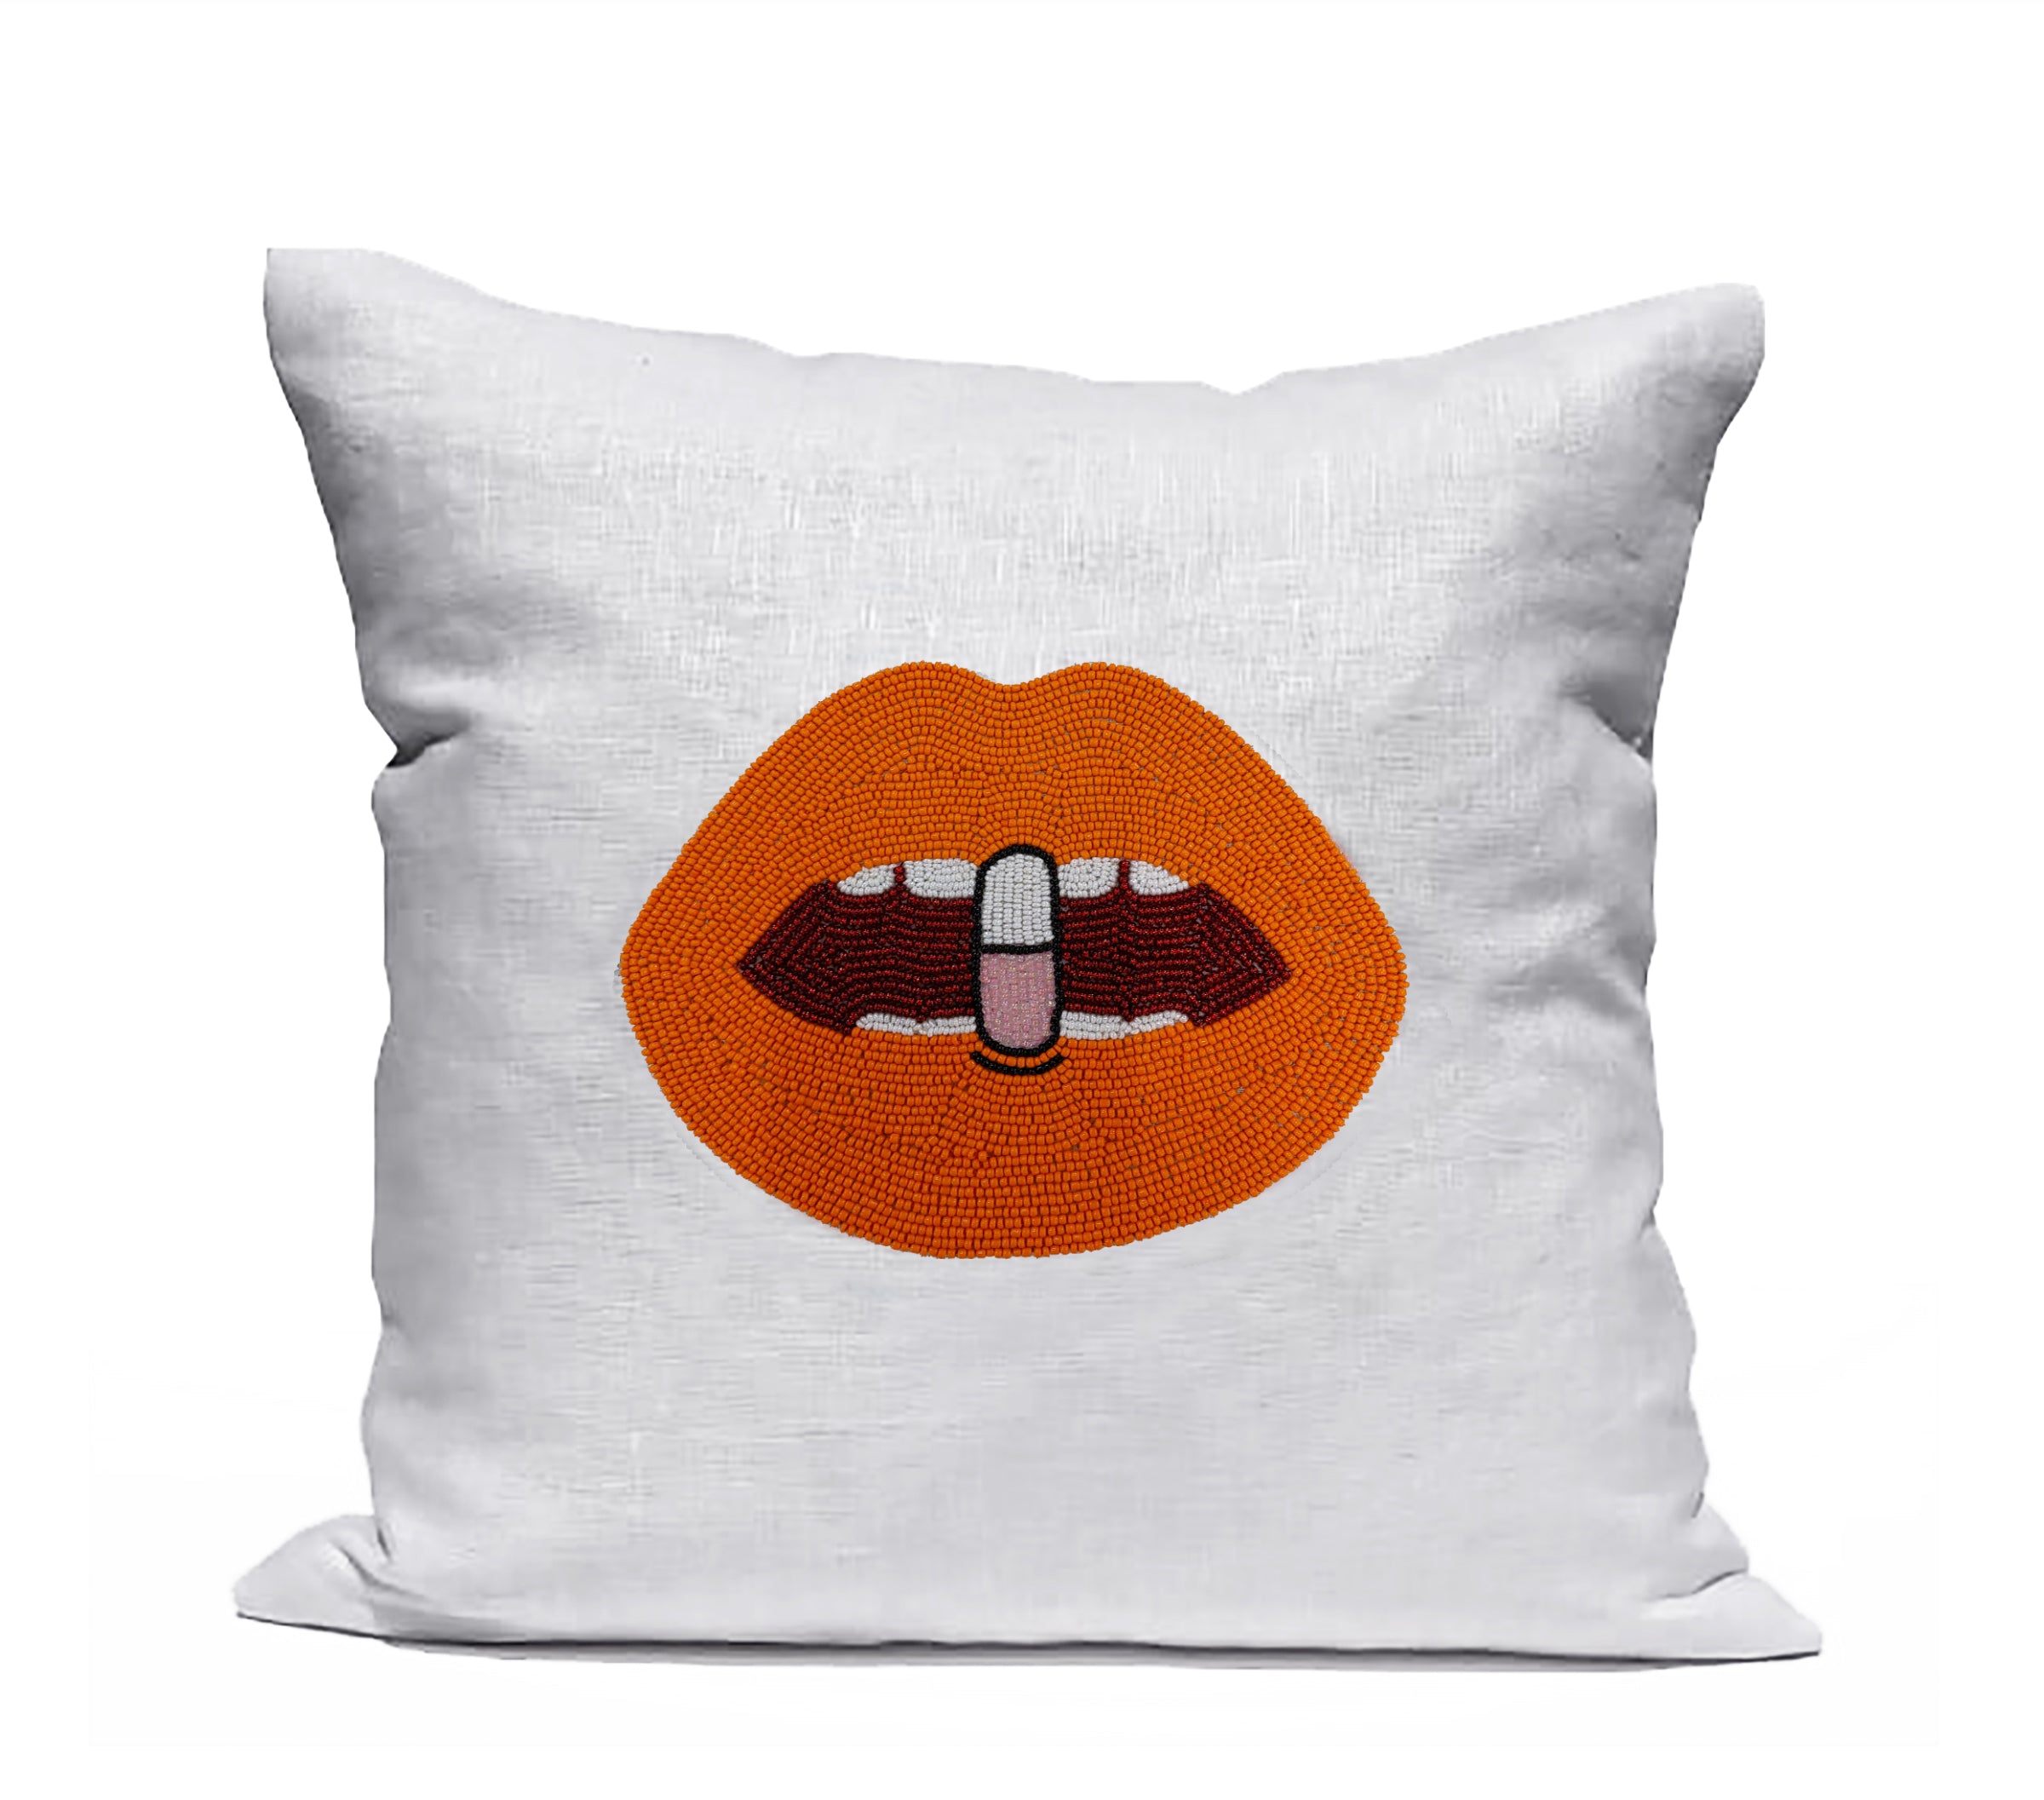 Amore Beaute White Linen With Orange Lips Chill Pill Pillow Cover, back to school gift